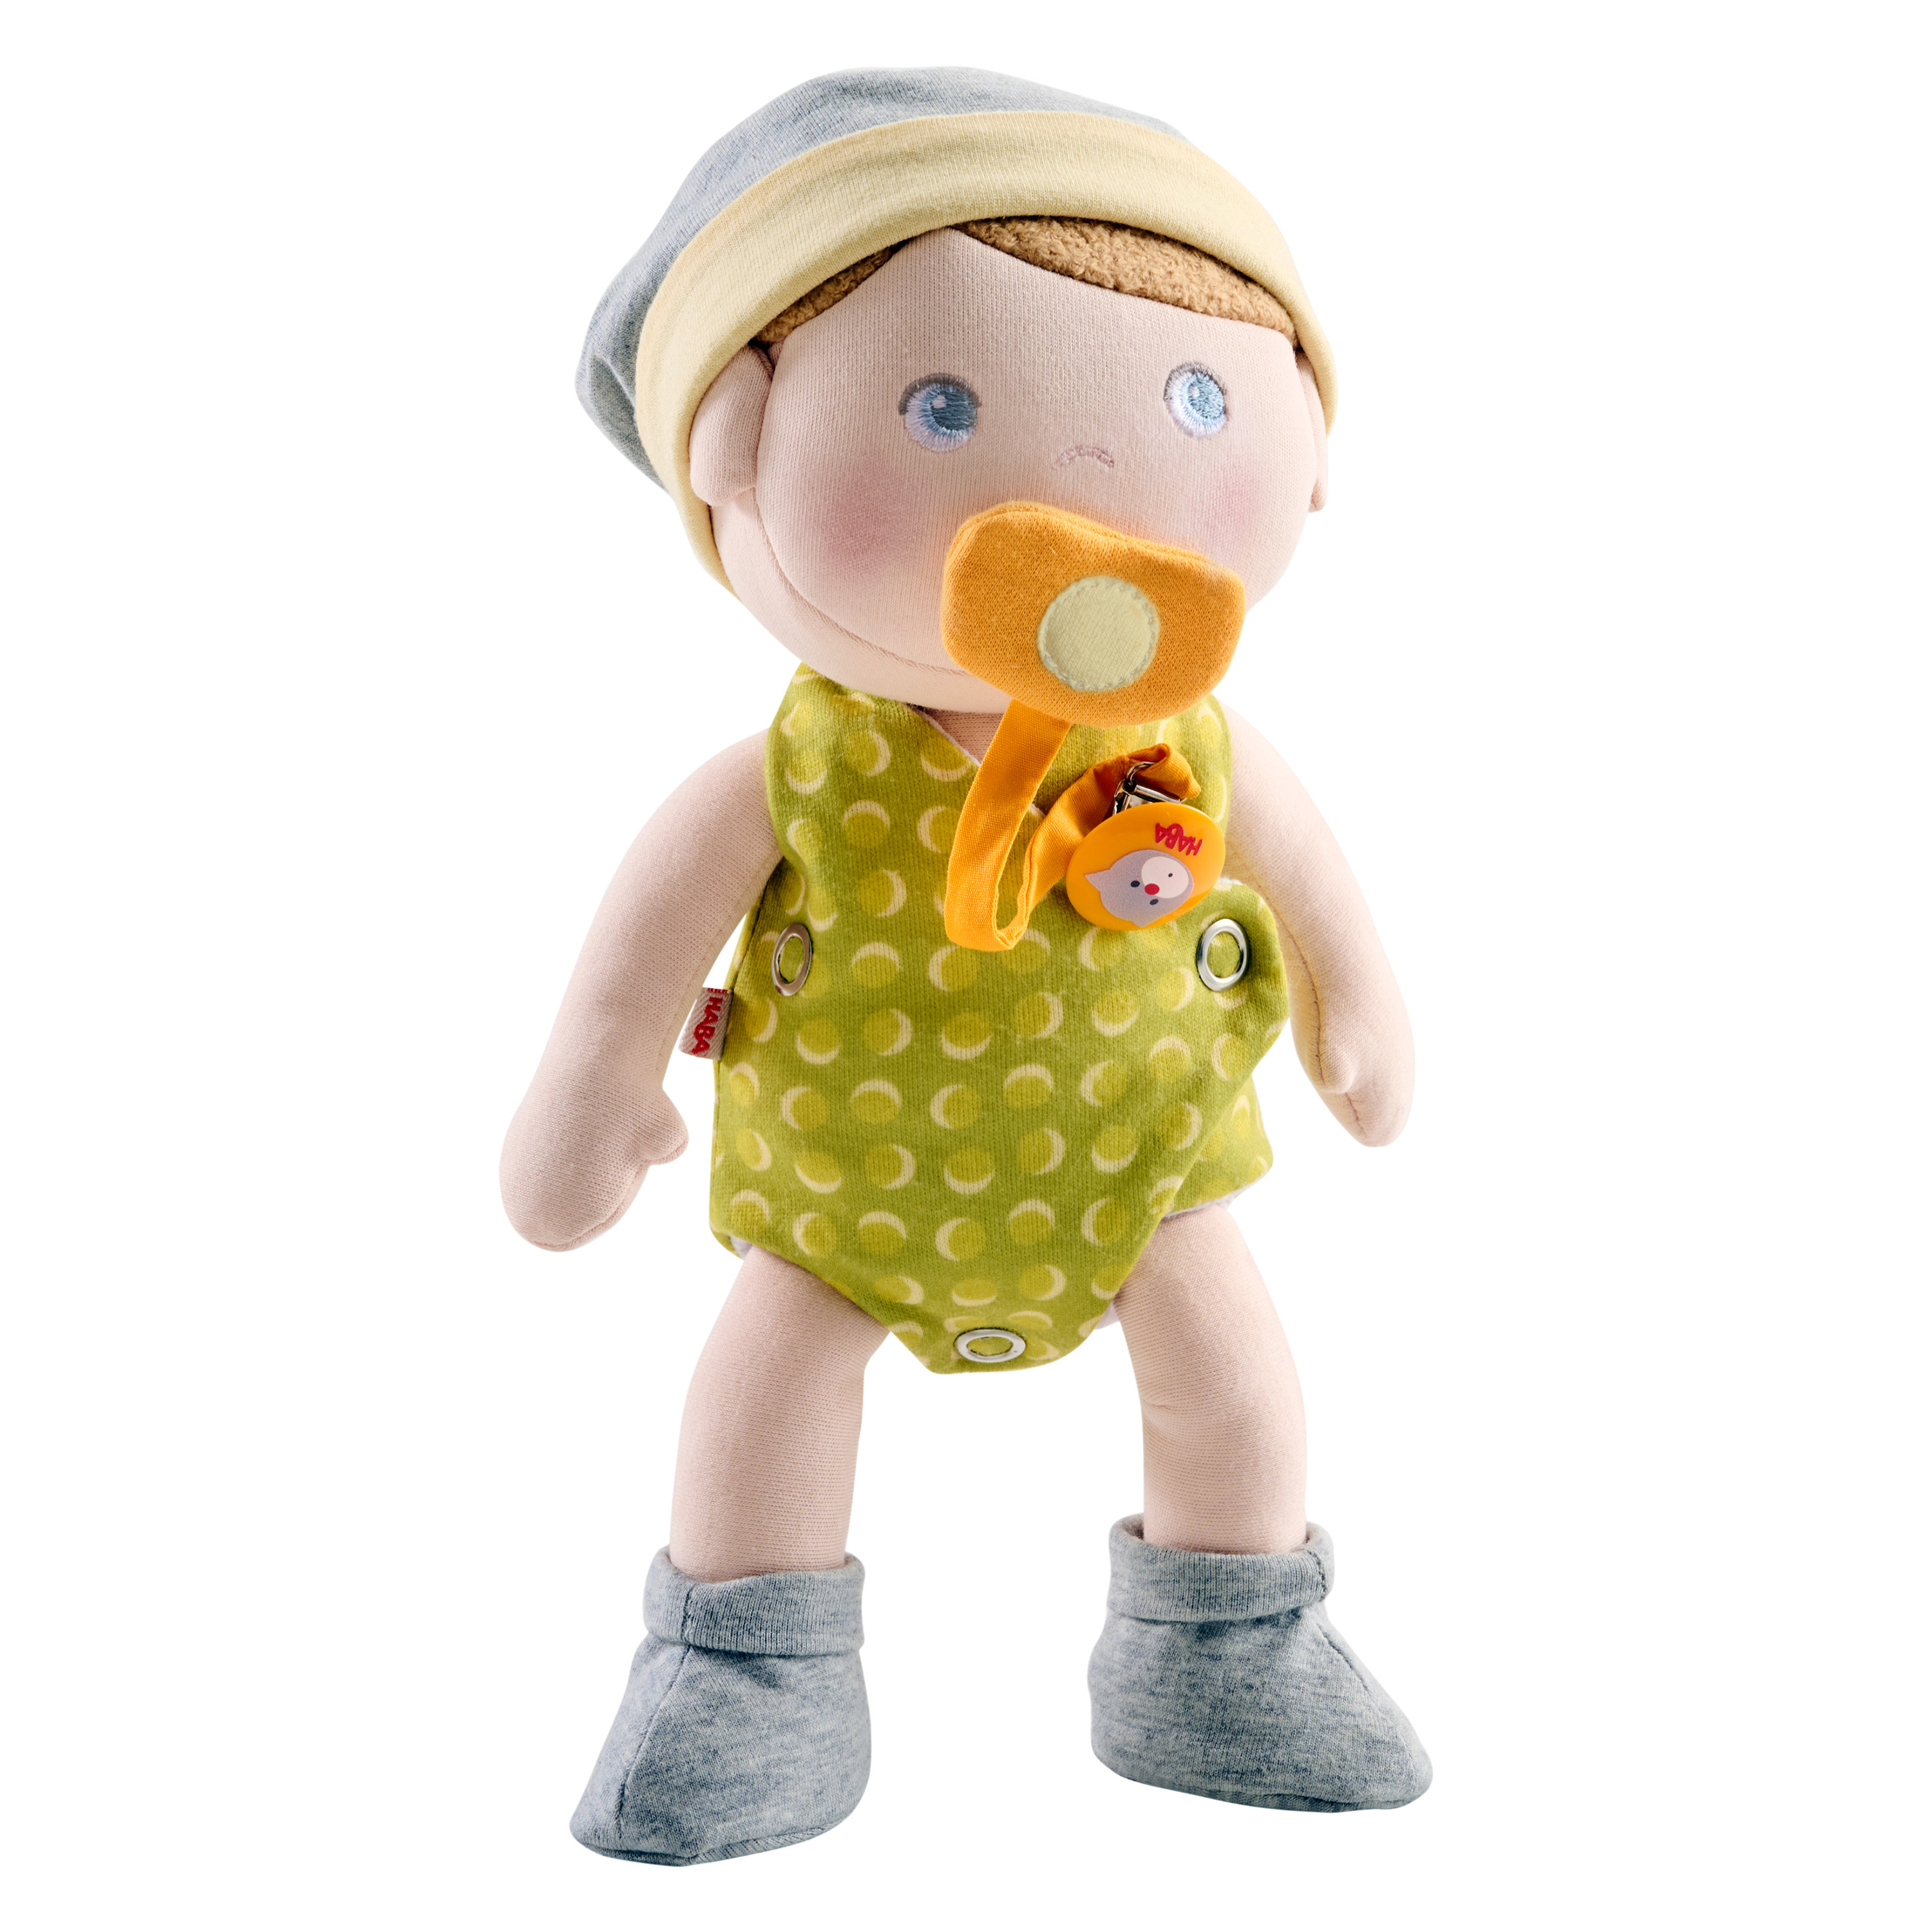 HABA Weichpuppe 'Babypuppe Maxime', 28 cm